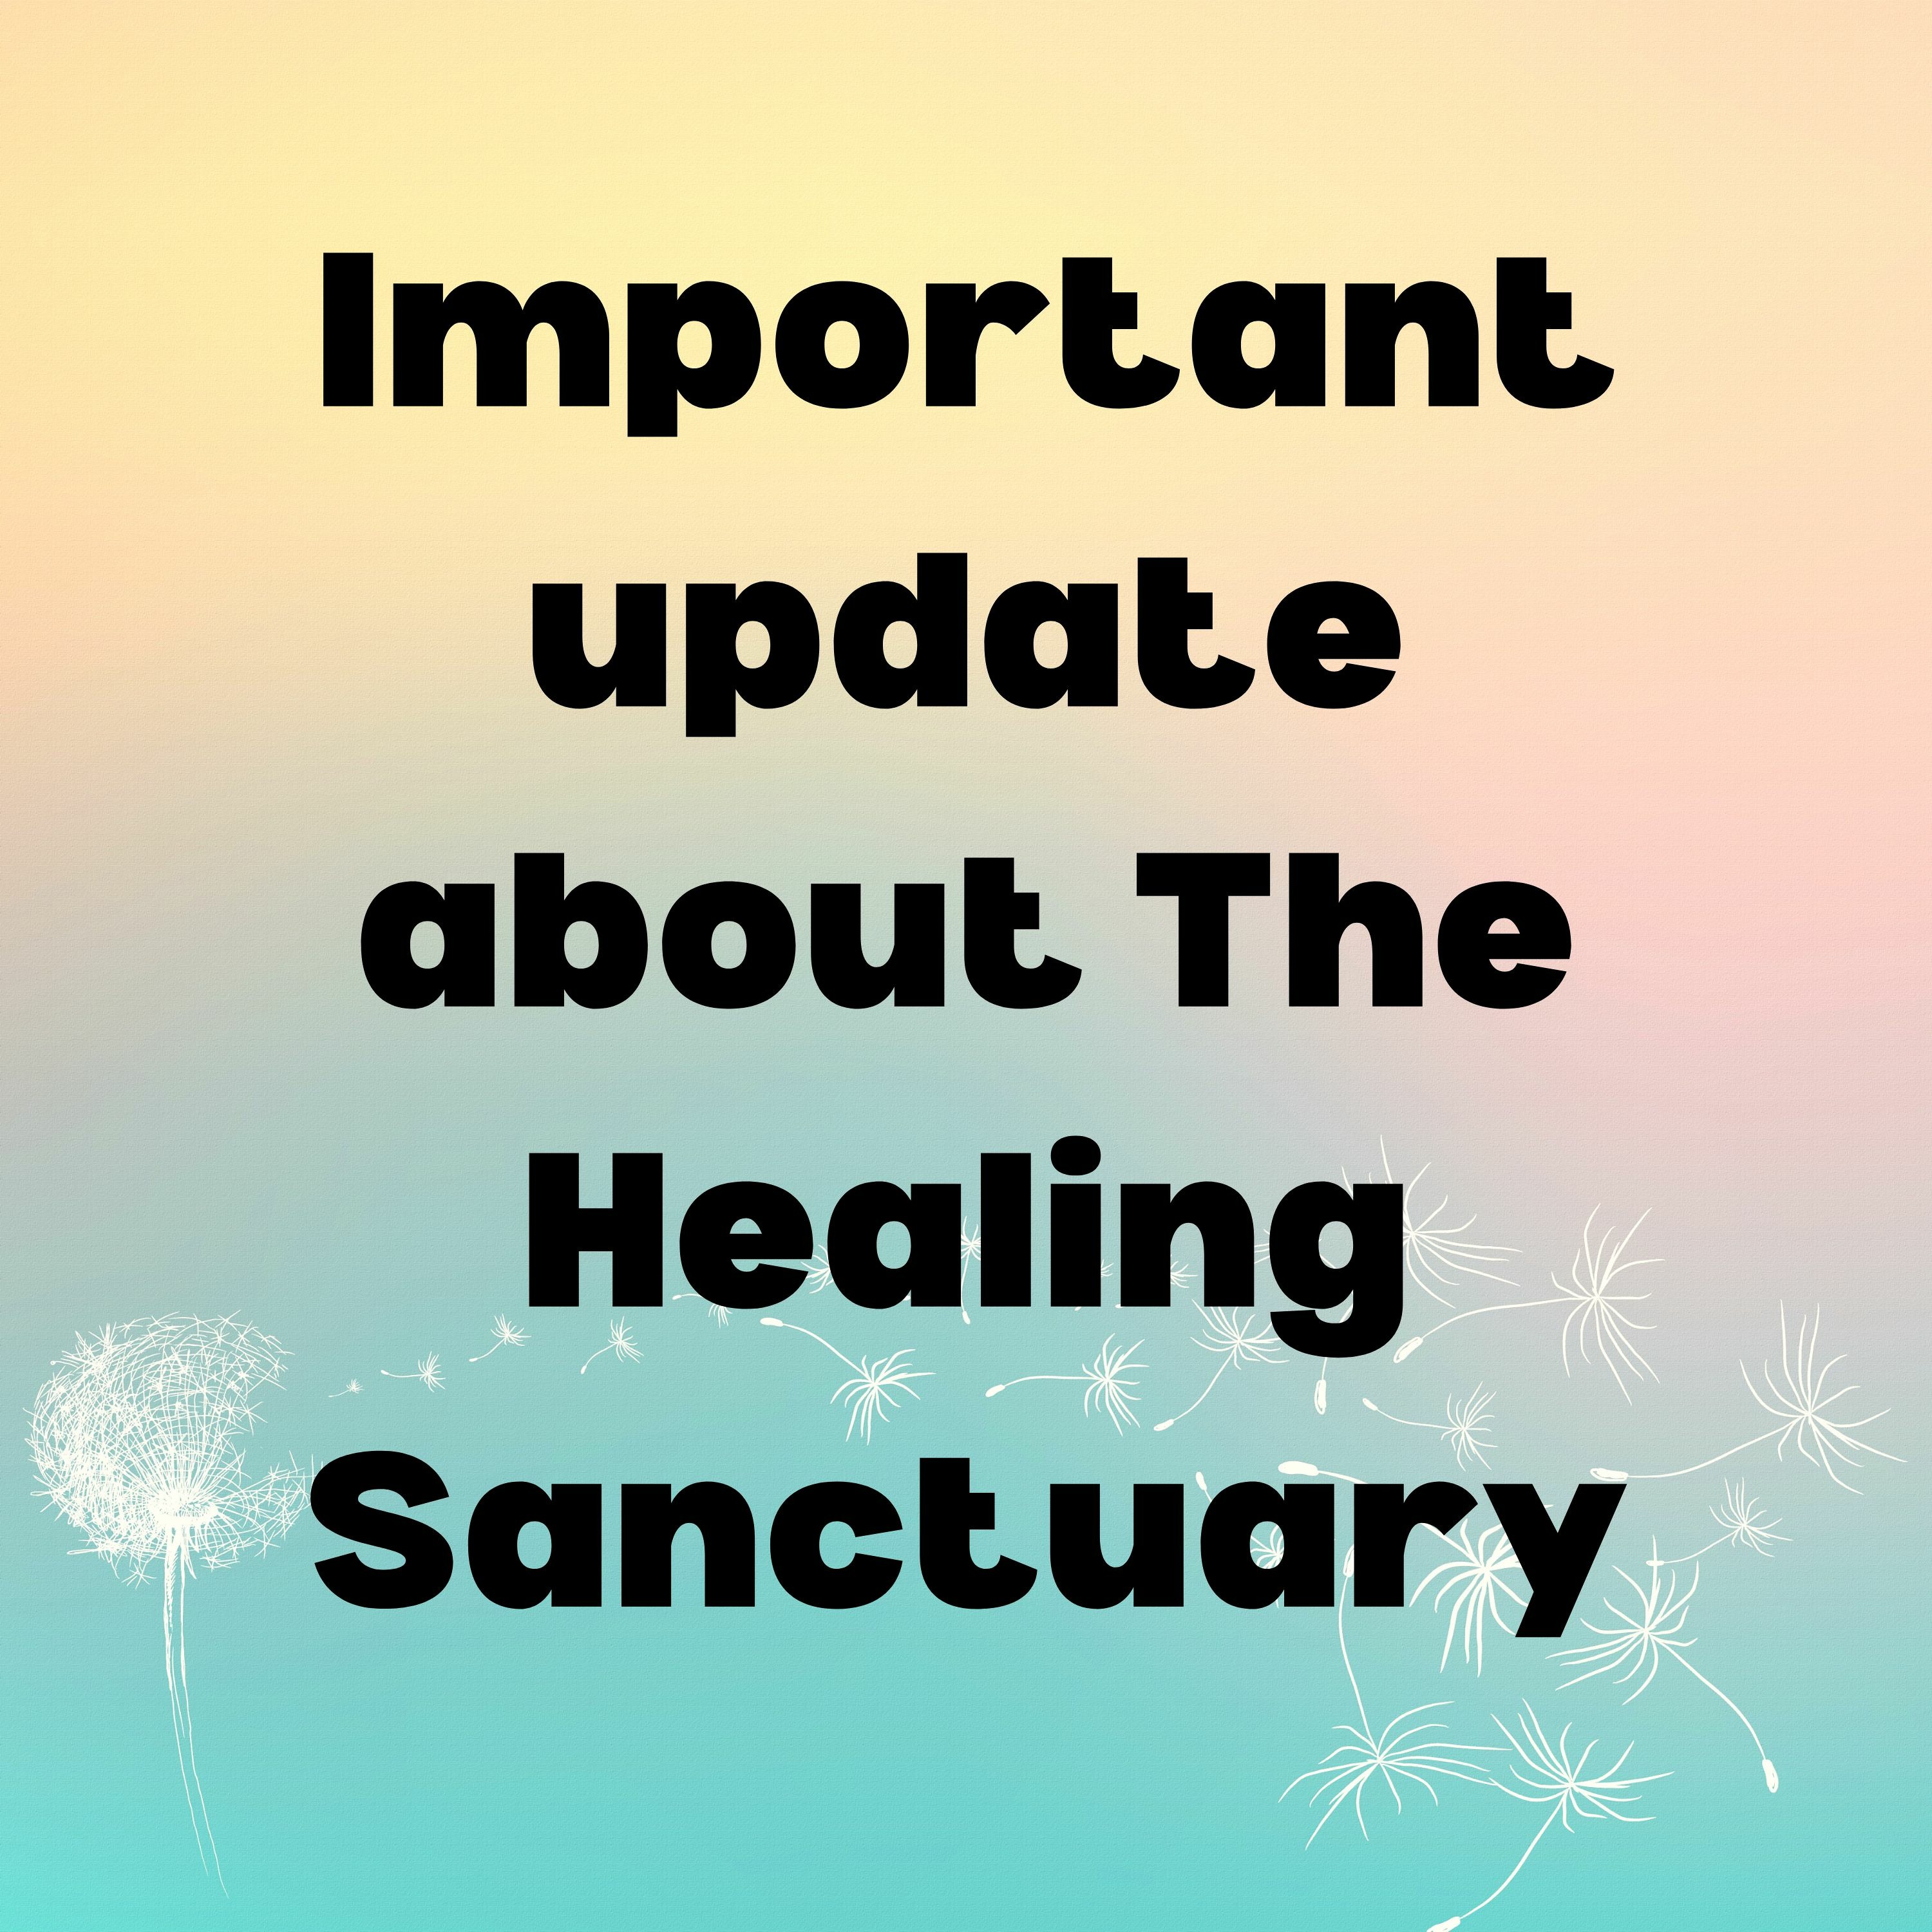 An Important Update About The Healing Sanctuary